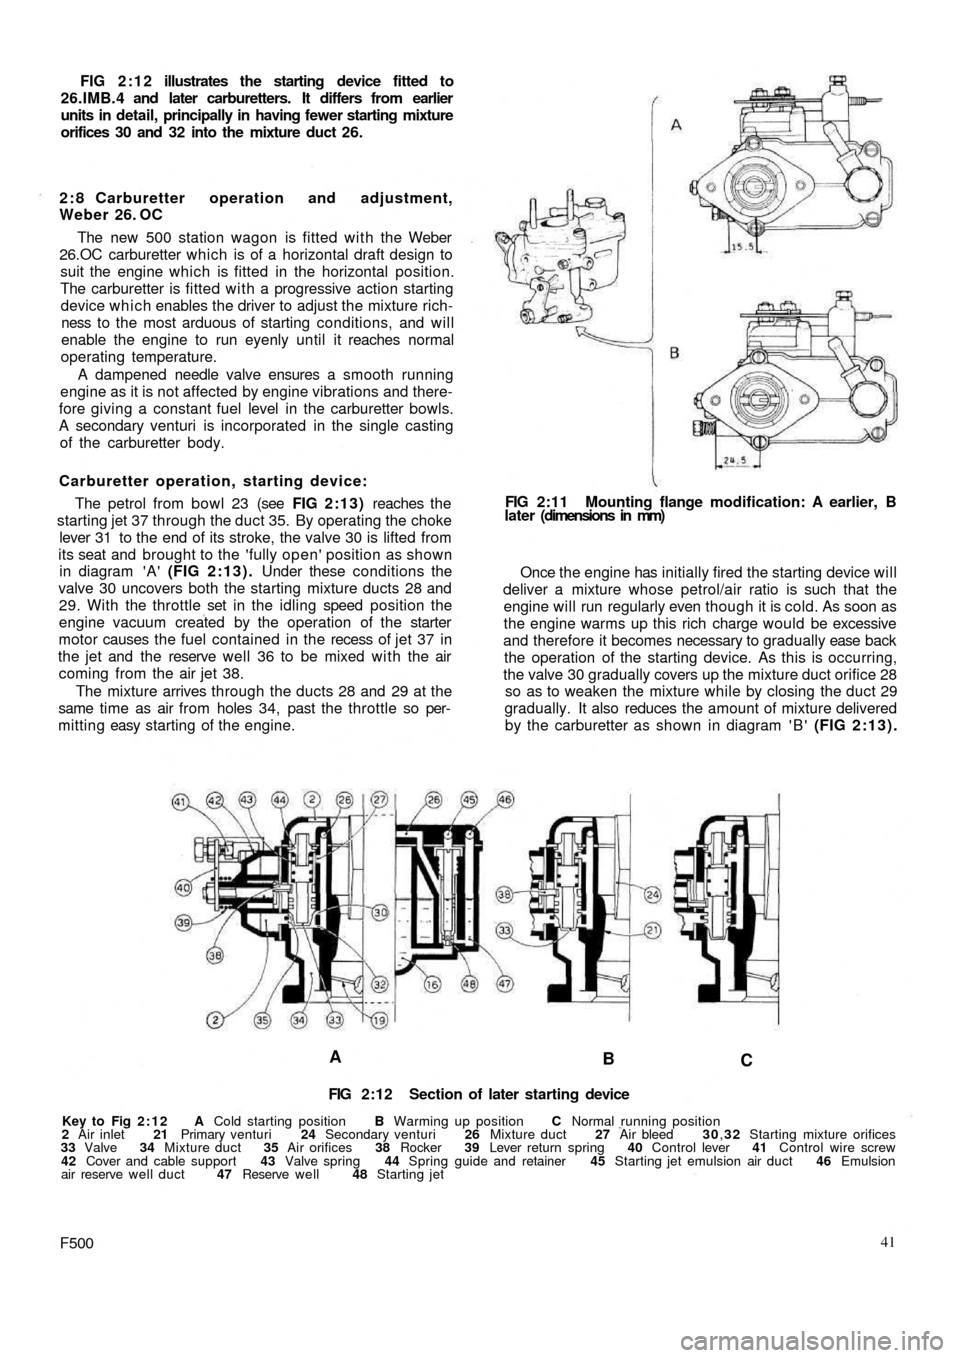 FIAT 500 1970 1.G Workshop Manual FIG 2:12 illustrates the starting device fitted to
26.IMB.4 and later carburetters. It differs from earlier
units in detail, principally in having fewer starting mixture
orifices 30 and 32 into the mi